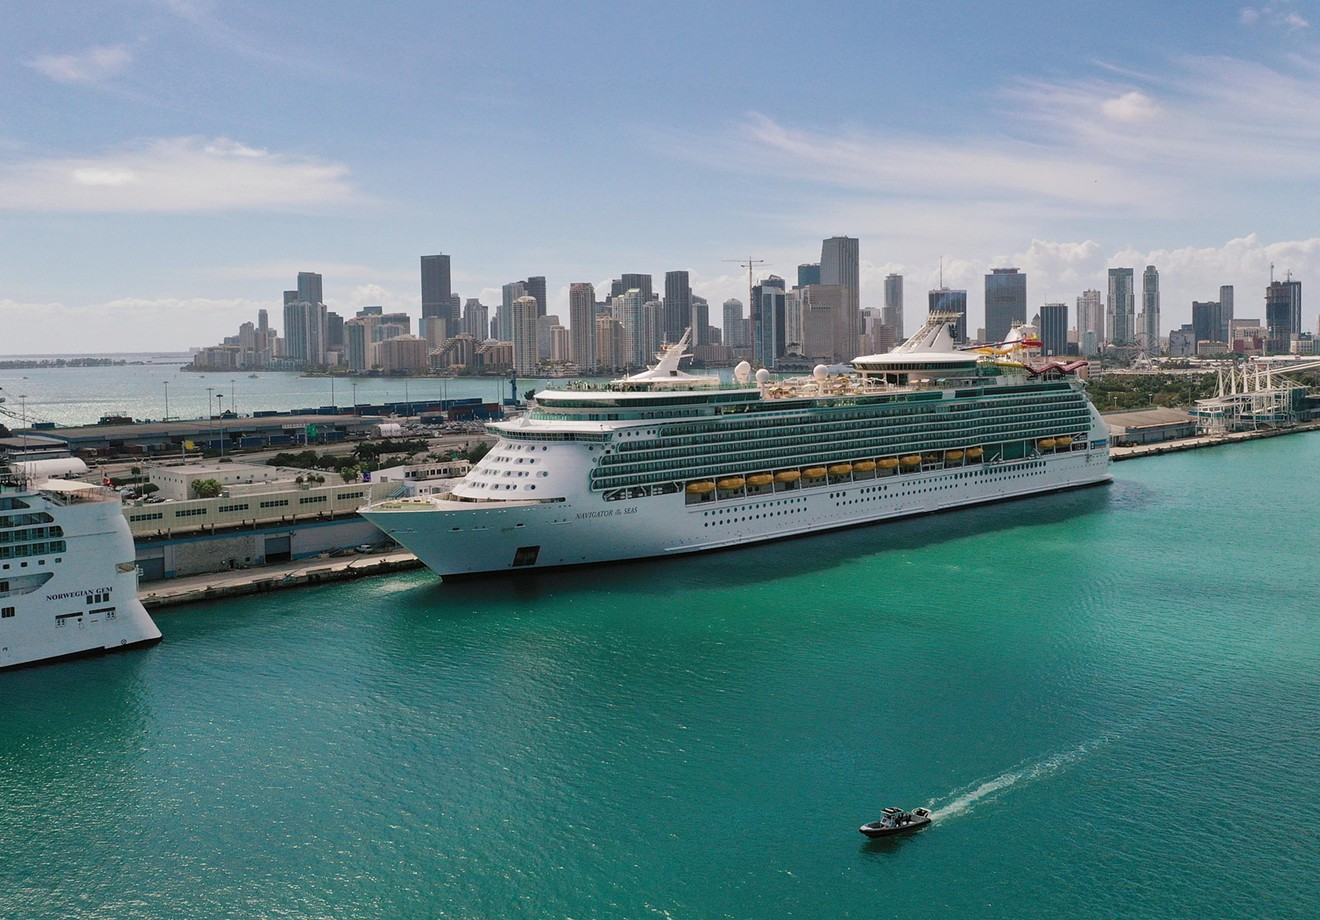 Royal Caribbean has been sued twice in the last eight months over separate incidents of alleged sexual misconduct aboard Navigator of the Seas, seen here docked in PortMiami.